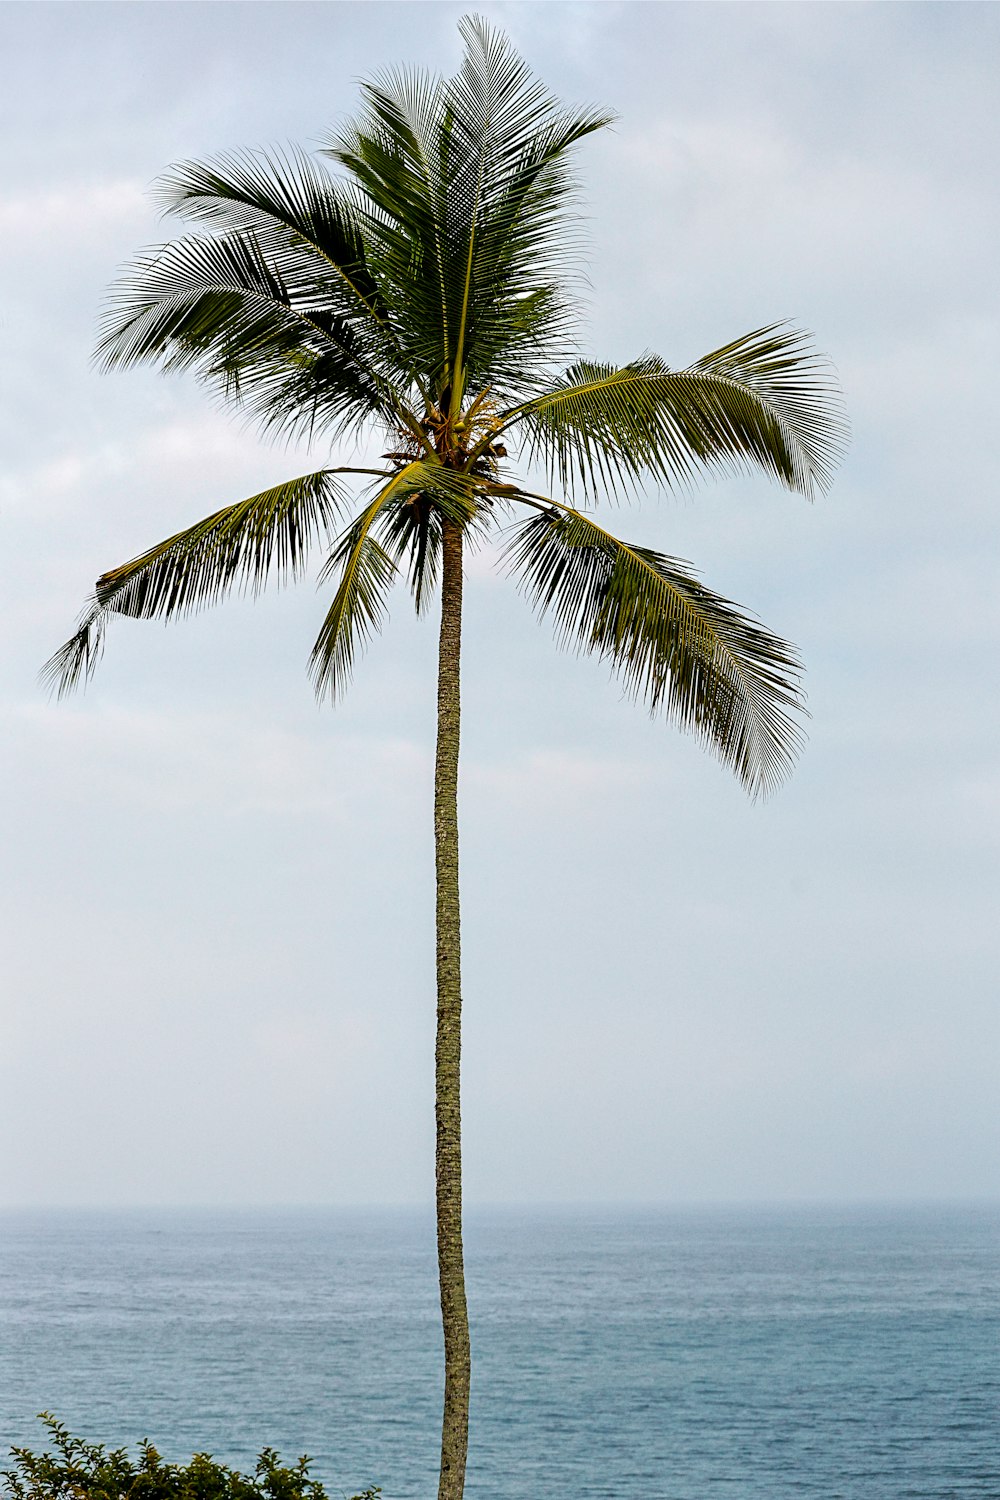 a palm tree on a beach with the ocean in the background